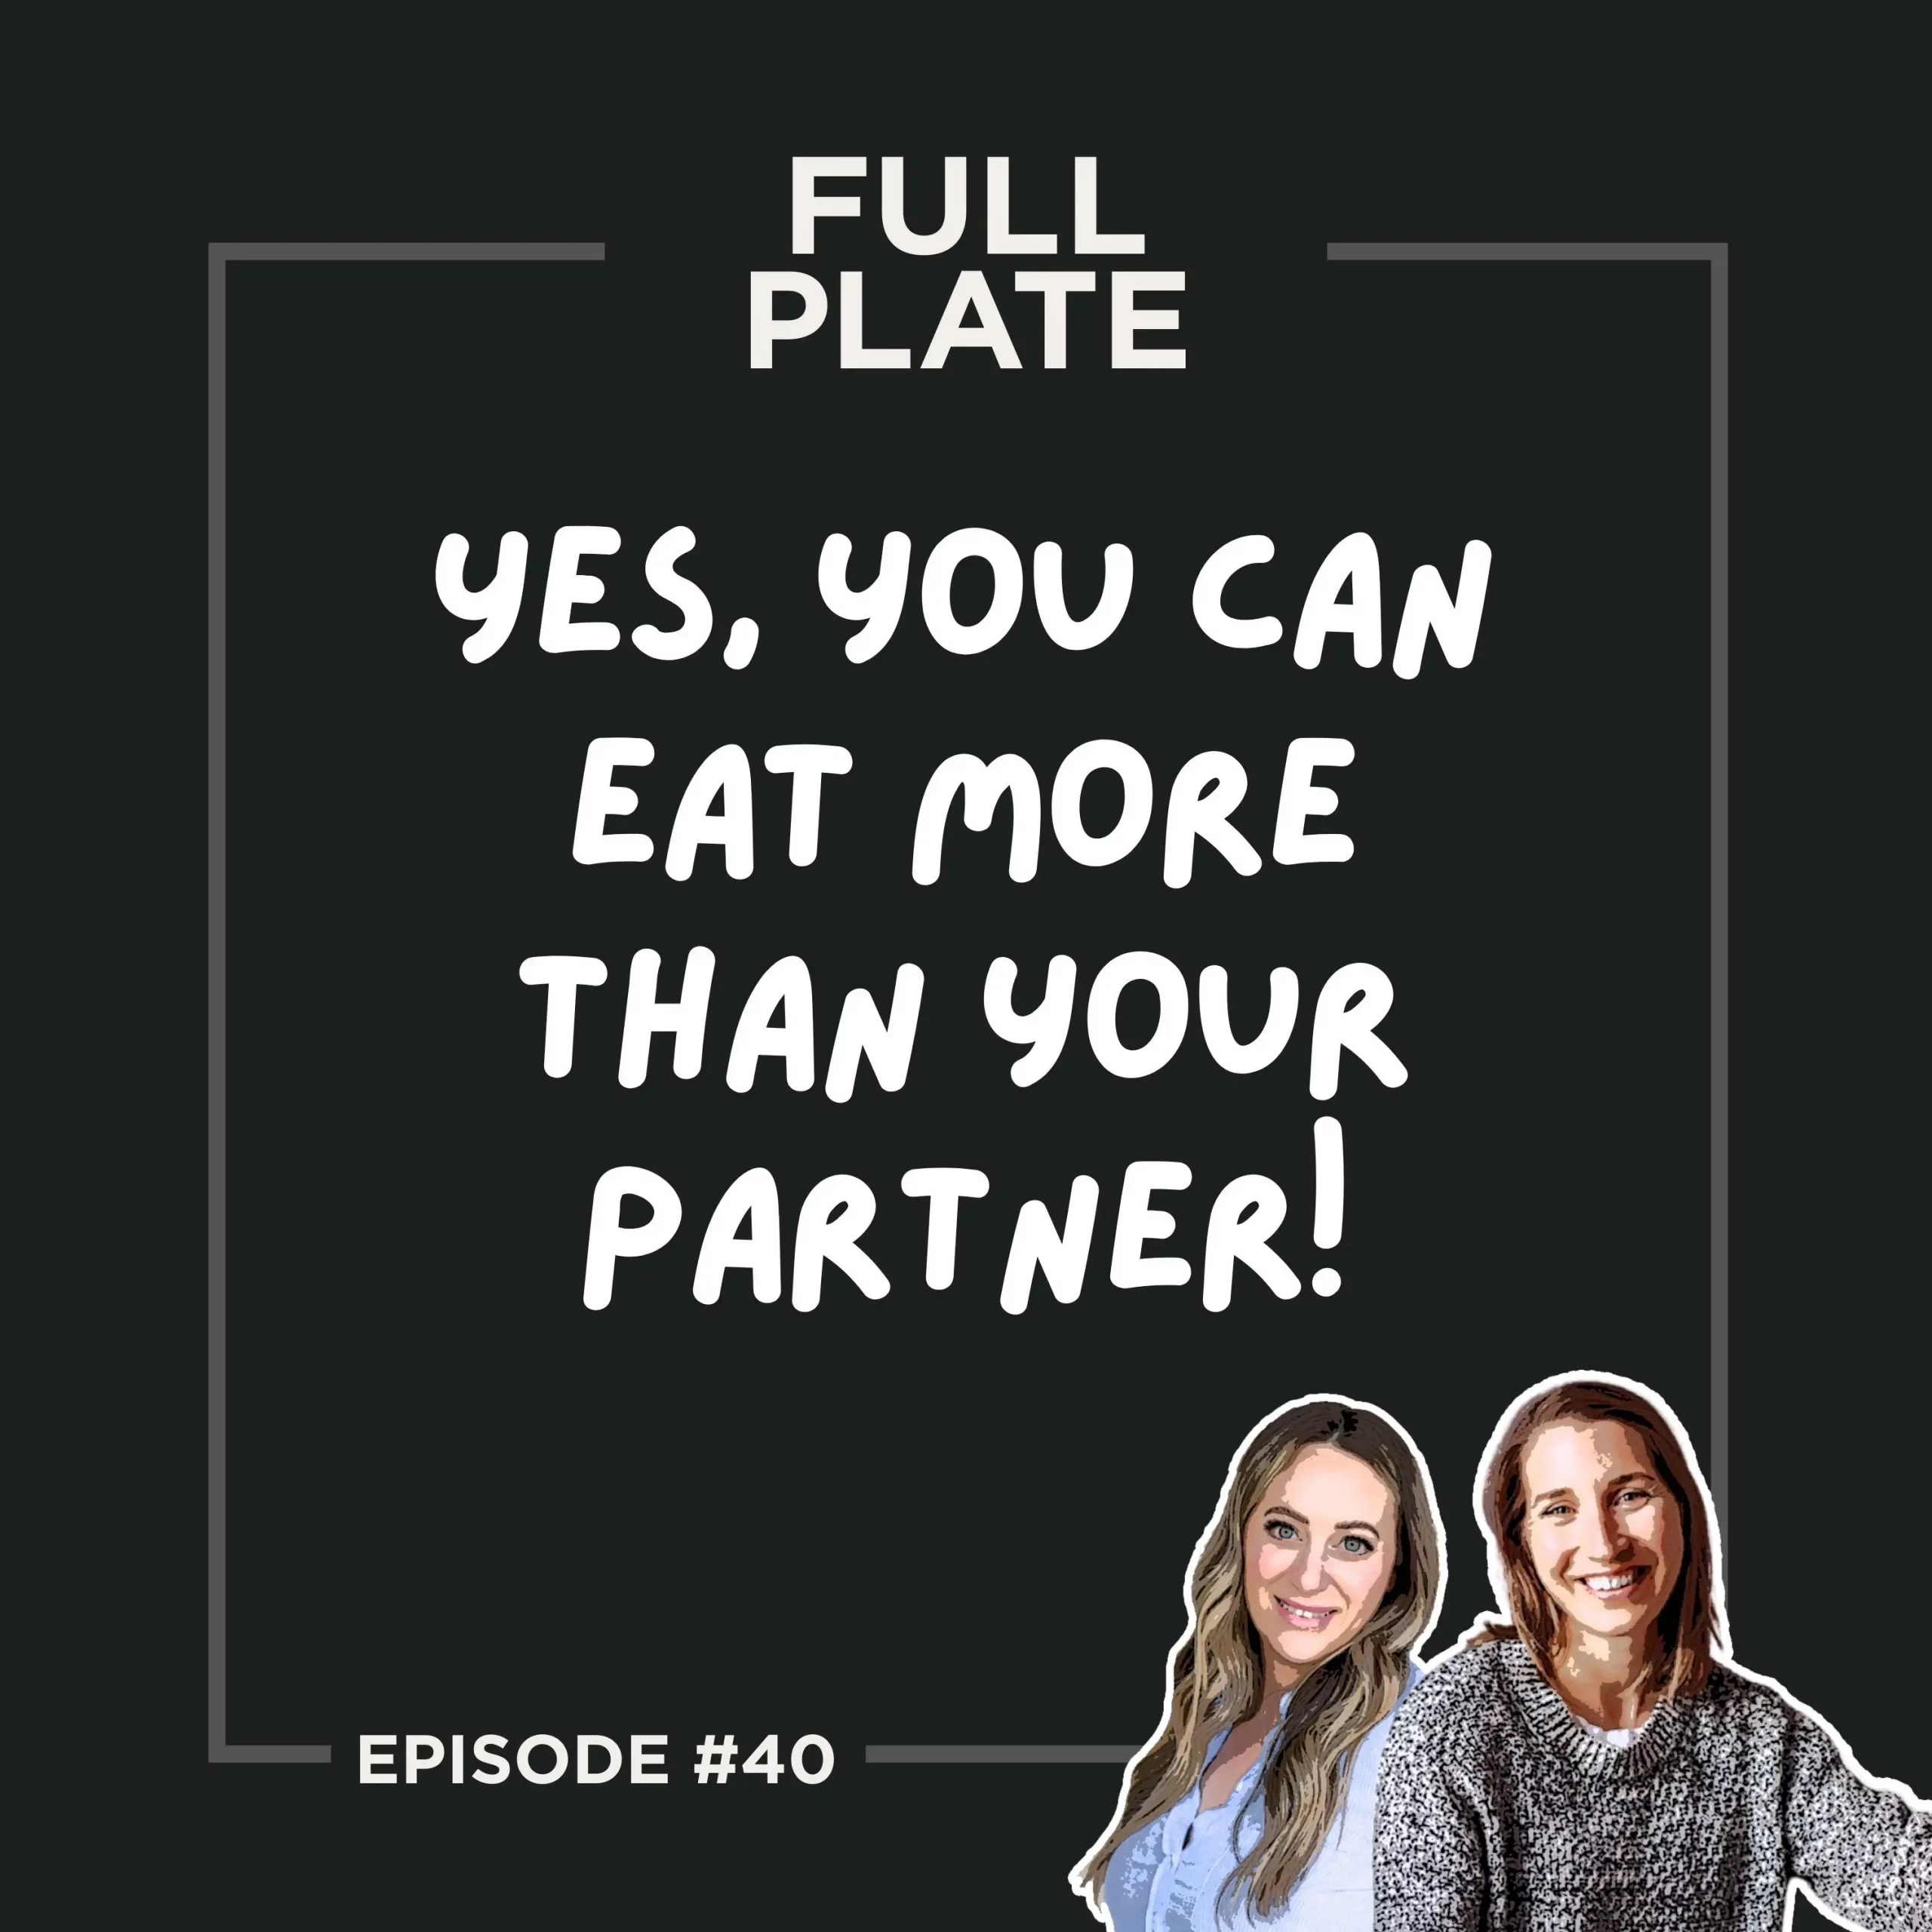 Full Plate Podcast | Ditch diet culture, respect your body, and set boundaries | Episode 40: Yes, You Can Eat More Than Your Partner!